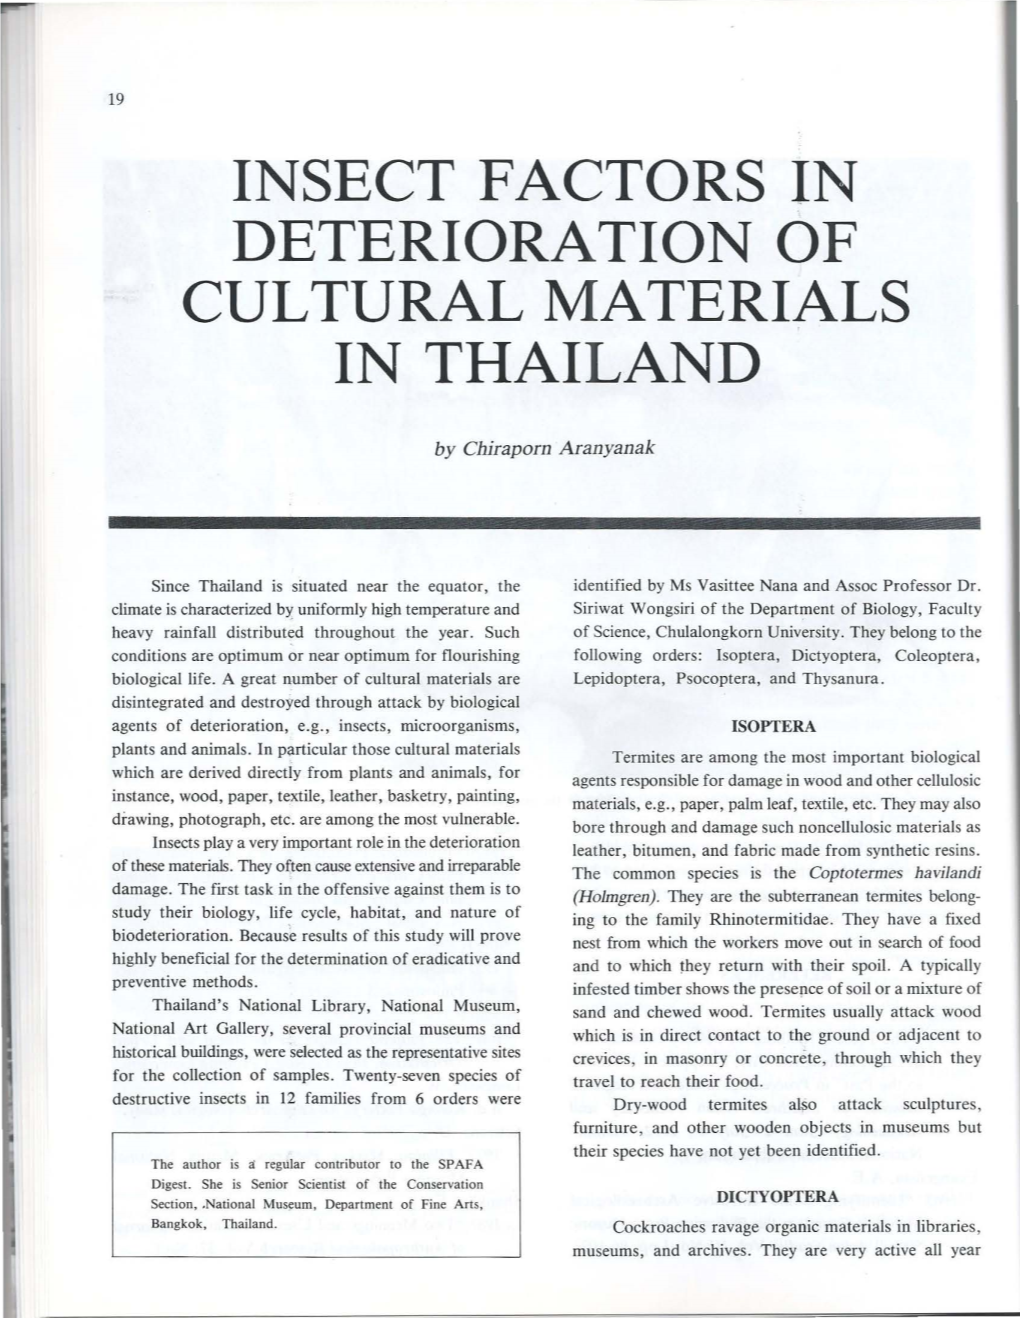 Insect Factors in Deterioration of Cultural Materials in Thailand